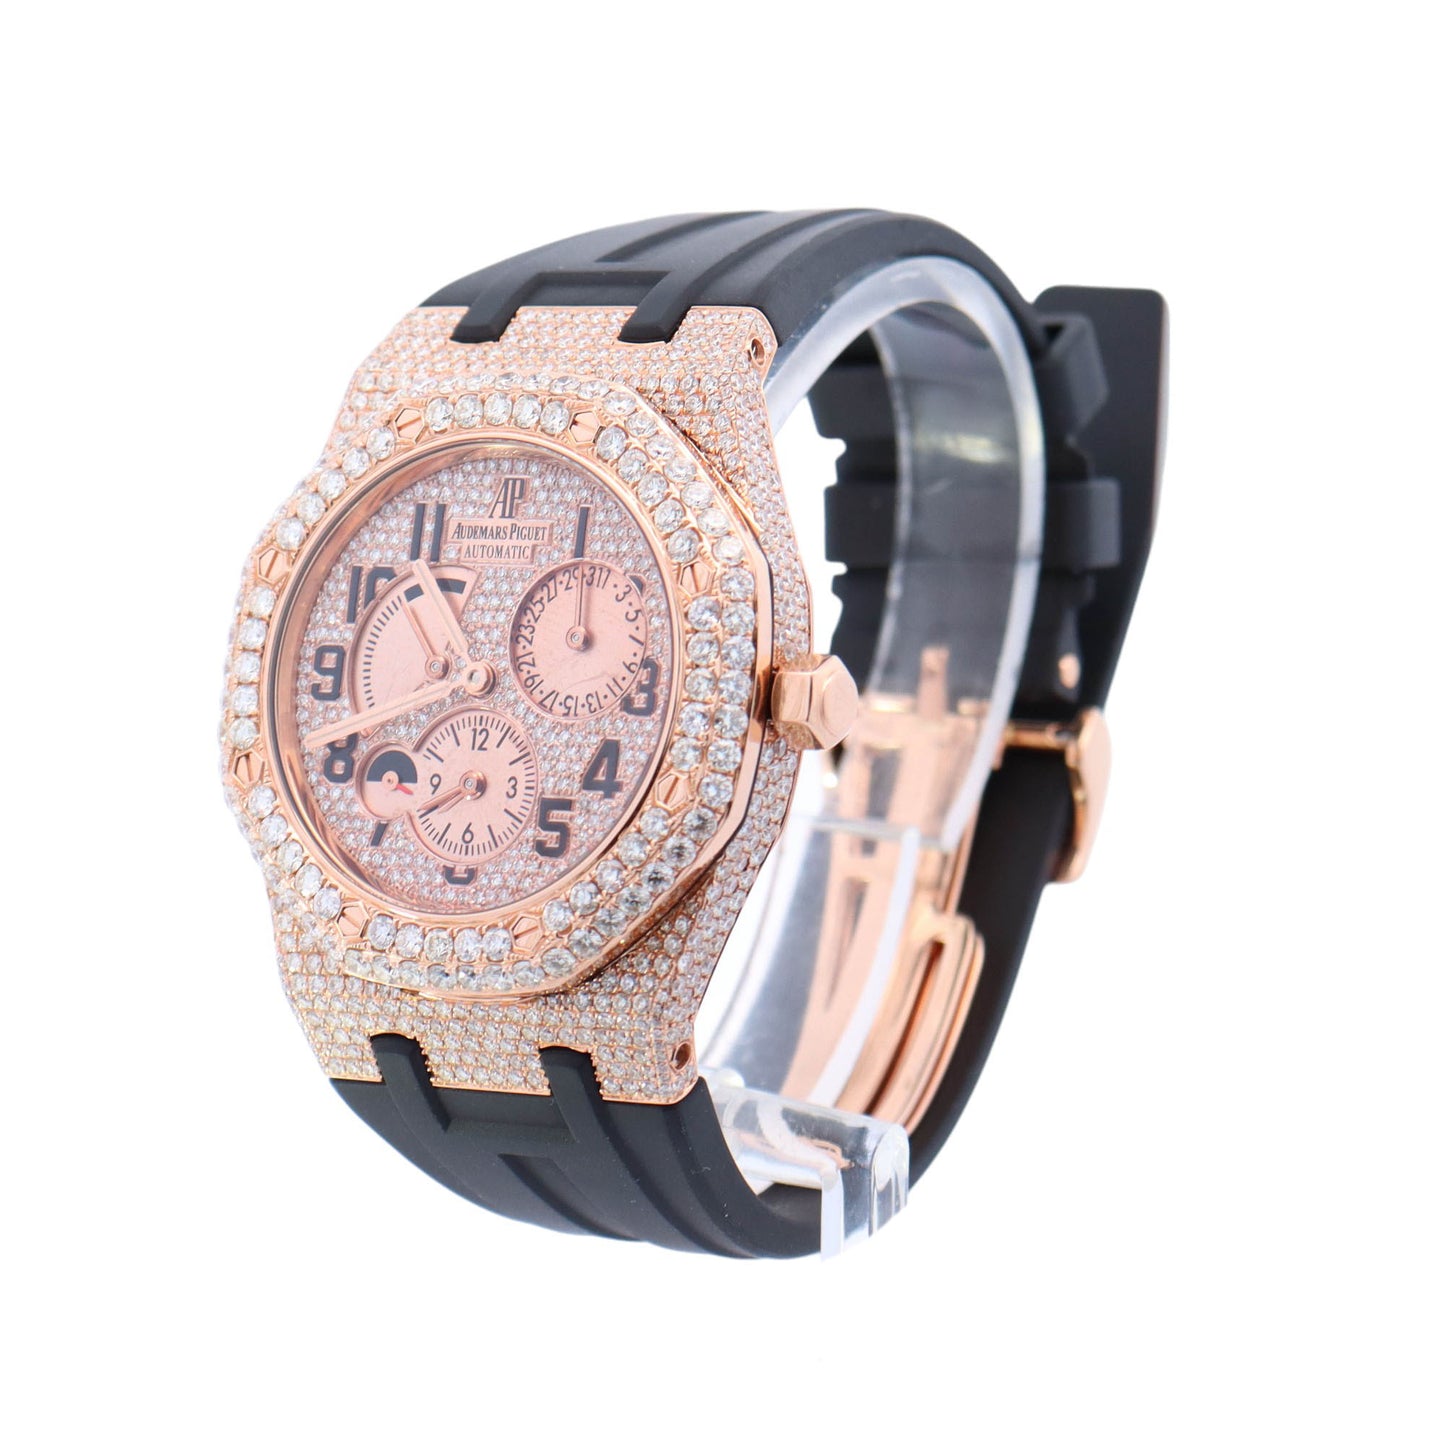 Audemars Piguet Dual Time " Iced Out" Rose Gold 39mm Custom Pave Diamond Dial Watch  Reference #:  26120OR.OO.D088CR.01 - Happy Jewelers Fine Jewelry Lifetime Warranty